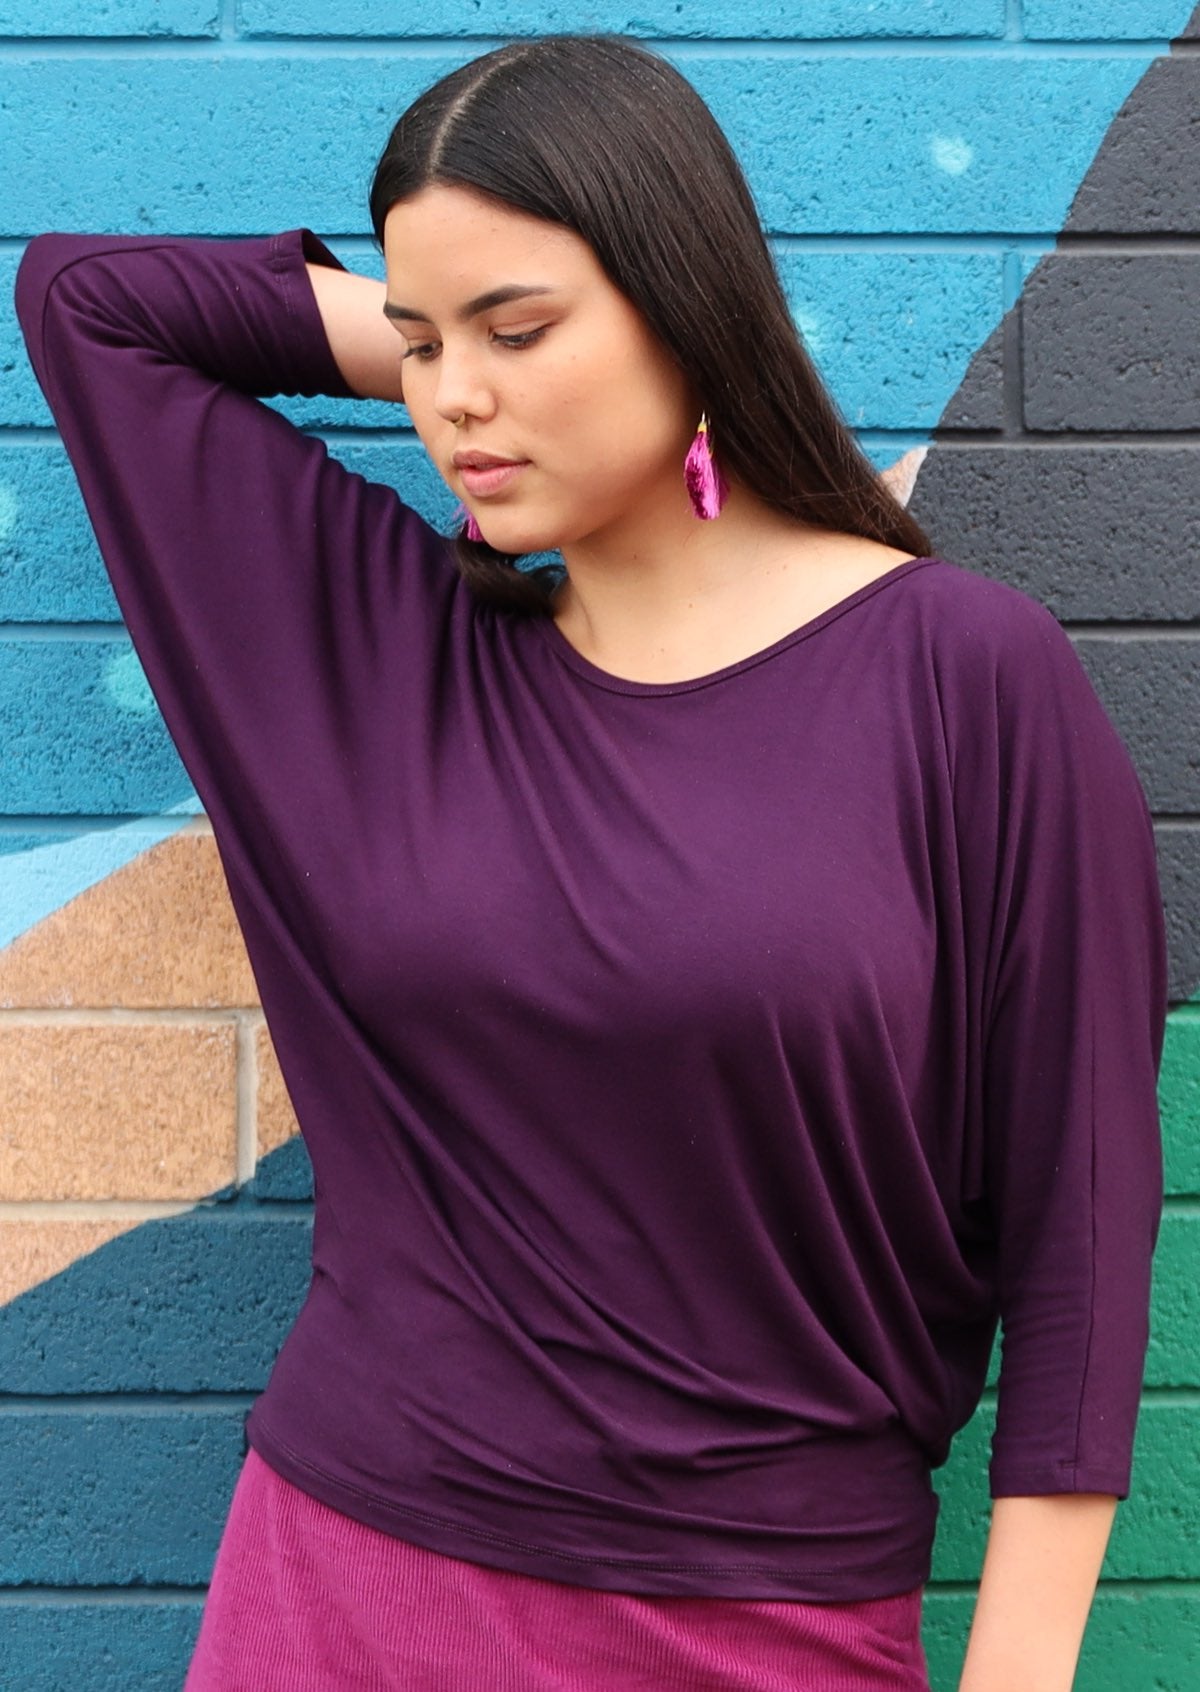 Woman with dark hair wearing a 3/4 sleeve rayon batwing round neckline purple top.